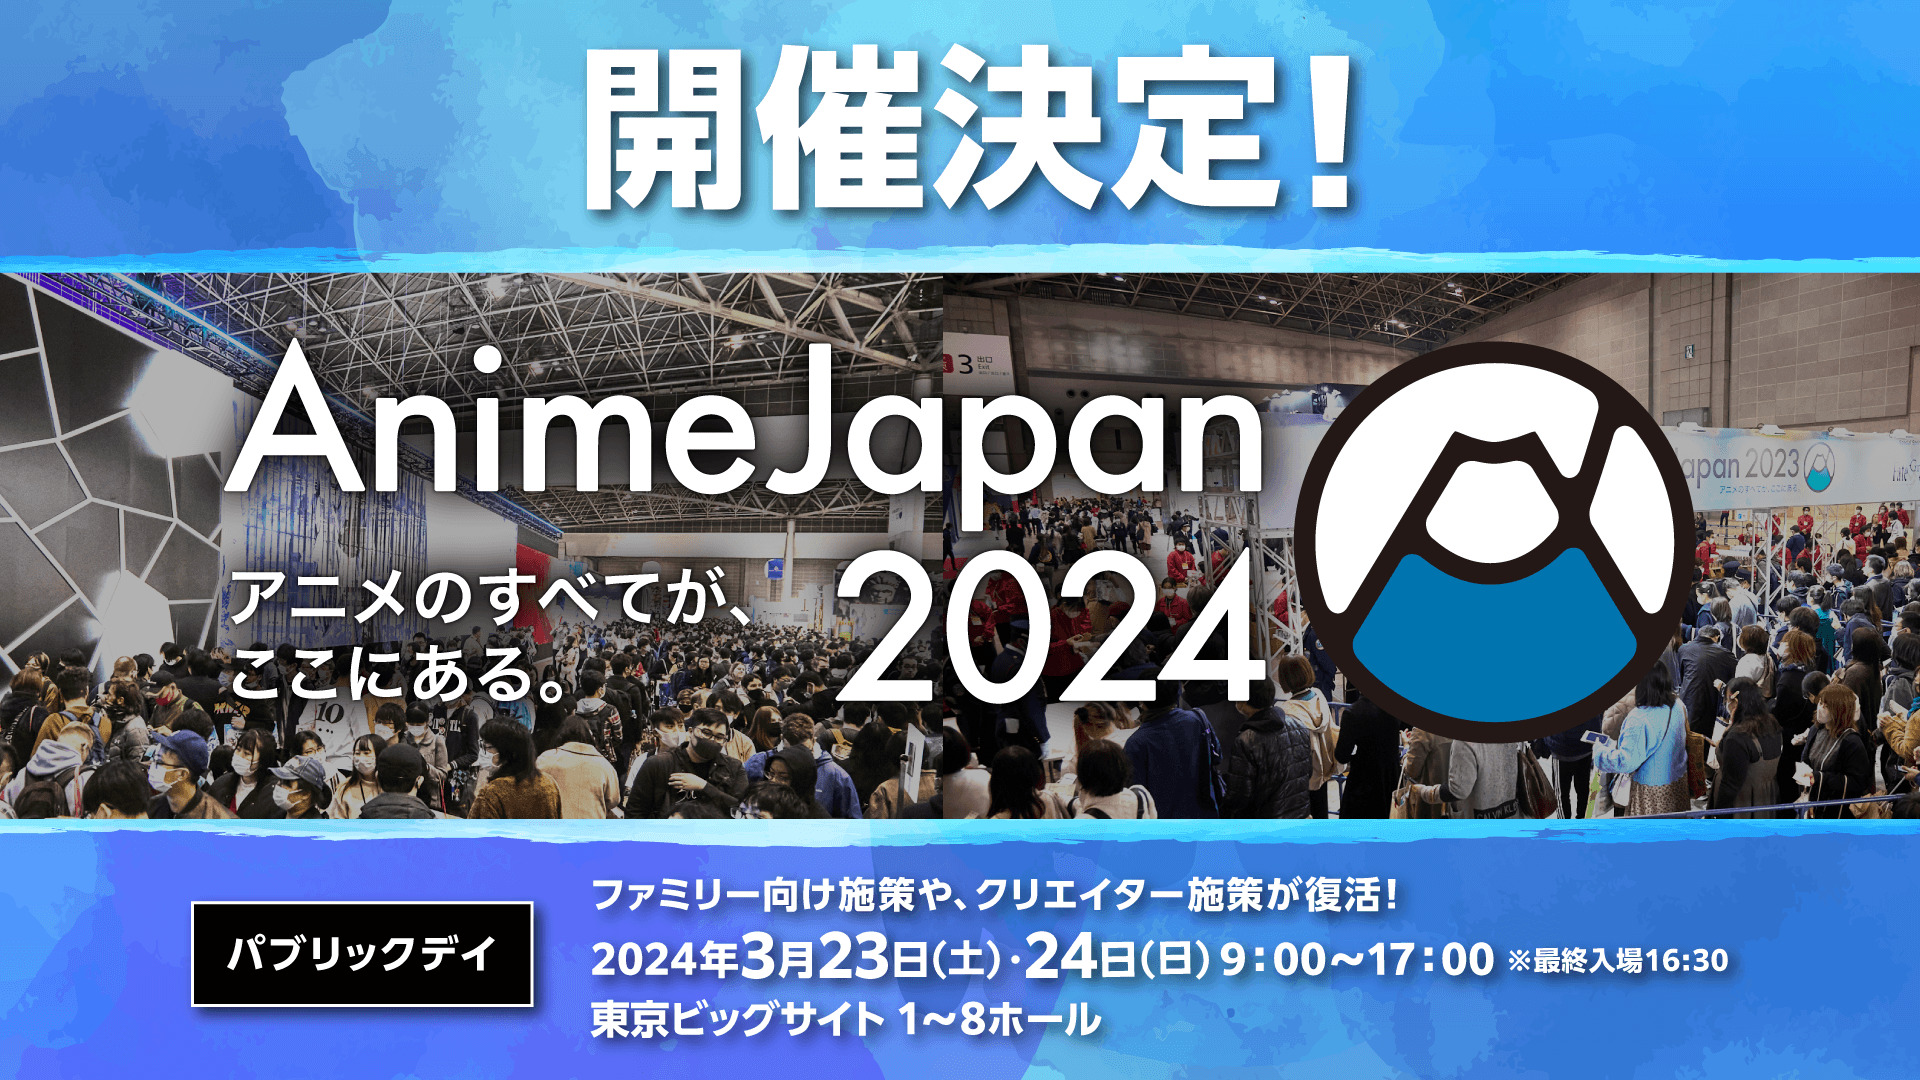 Top 10 Most-Streamed Shows In Japan In 2021 - Anime Galaxy-demhanvico.com.vn